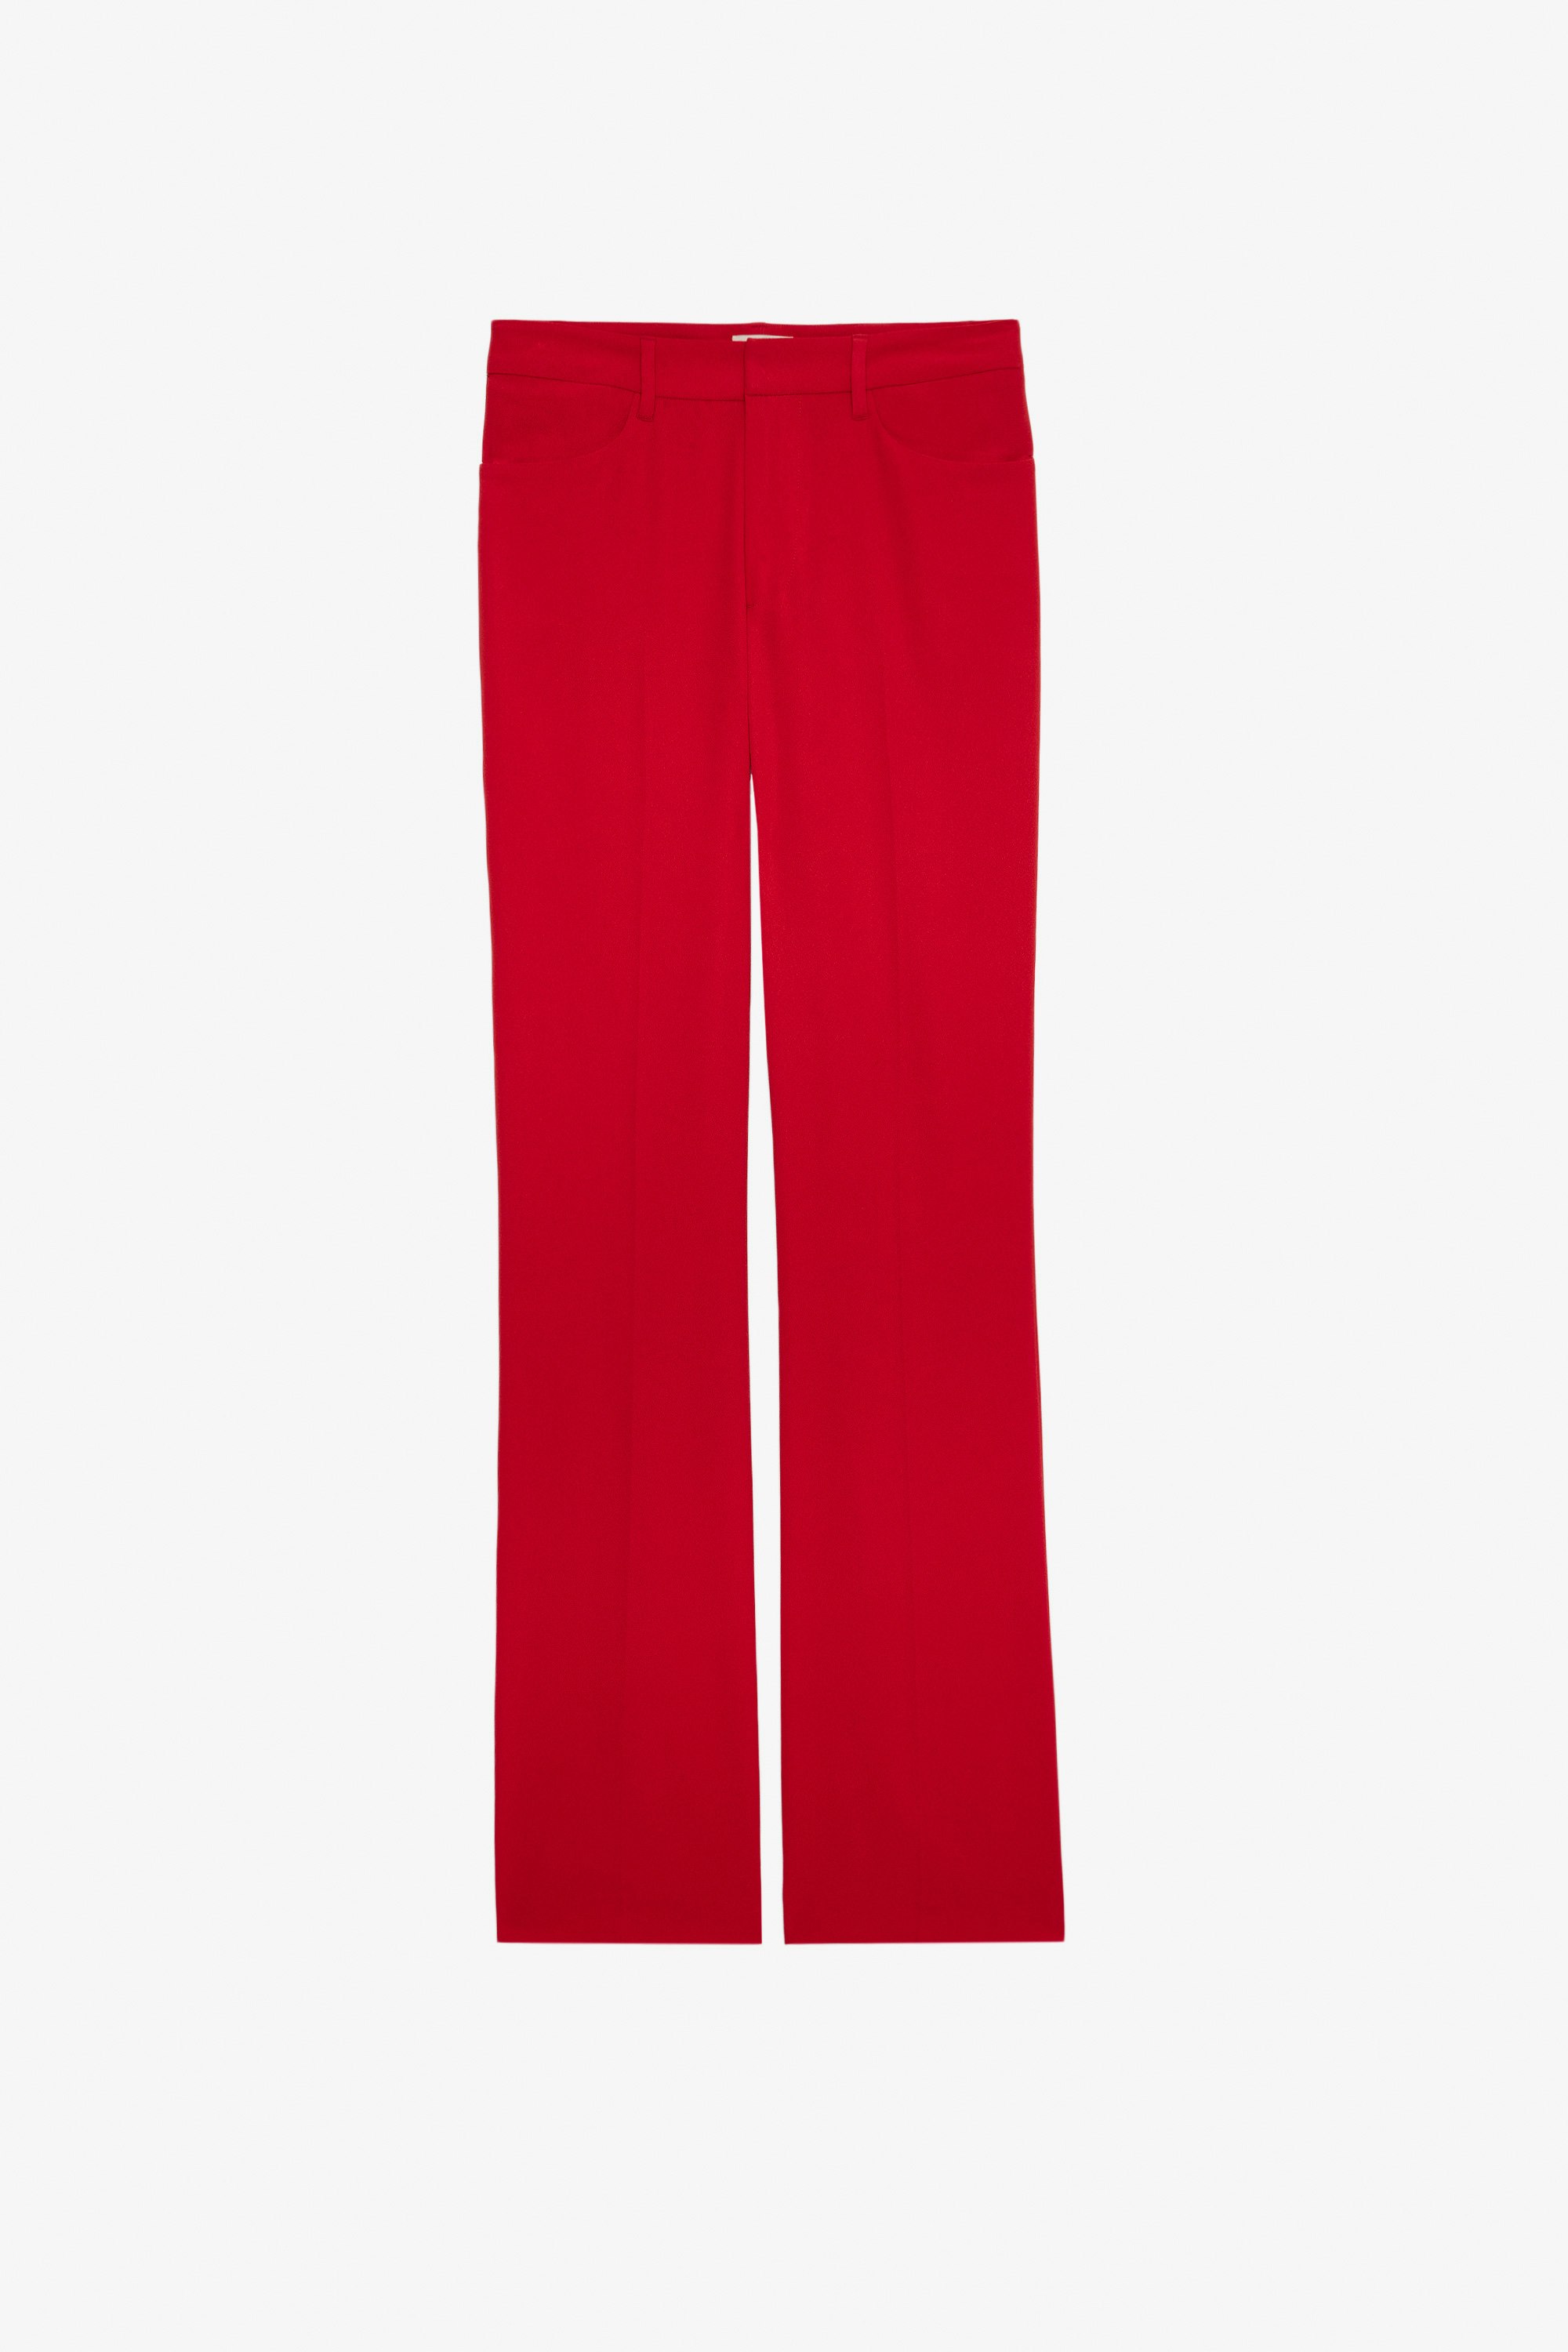 Pistol Trousers Women’s red crêpe tailored trousers.